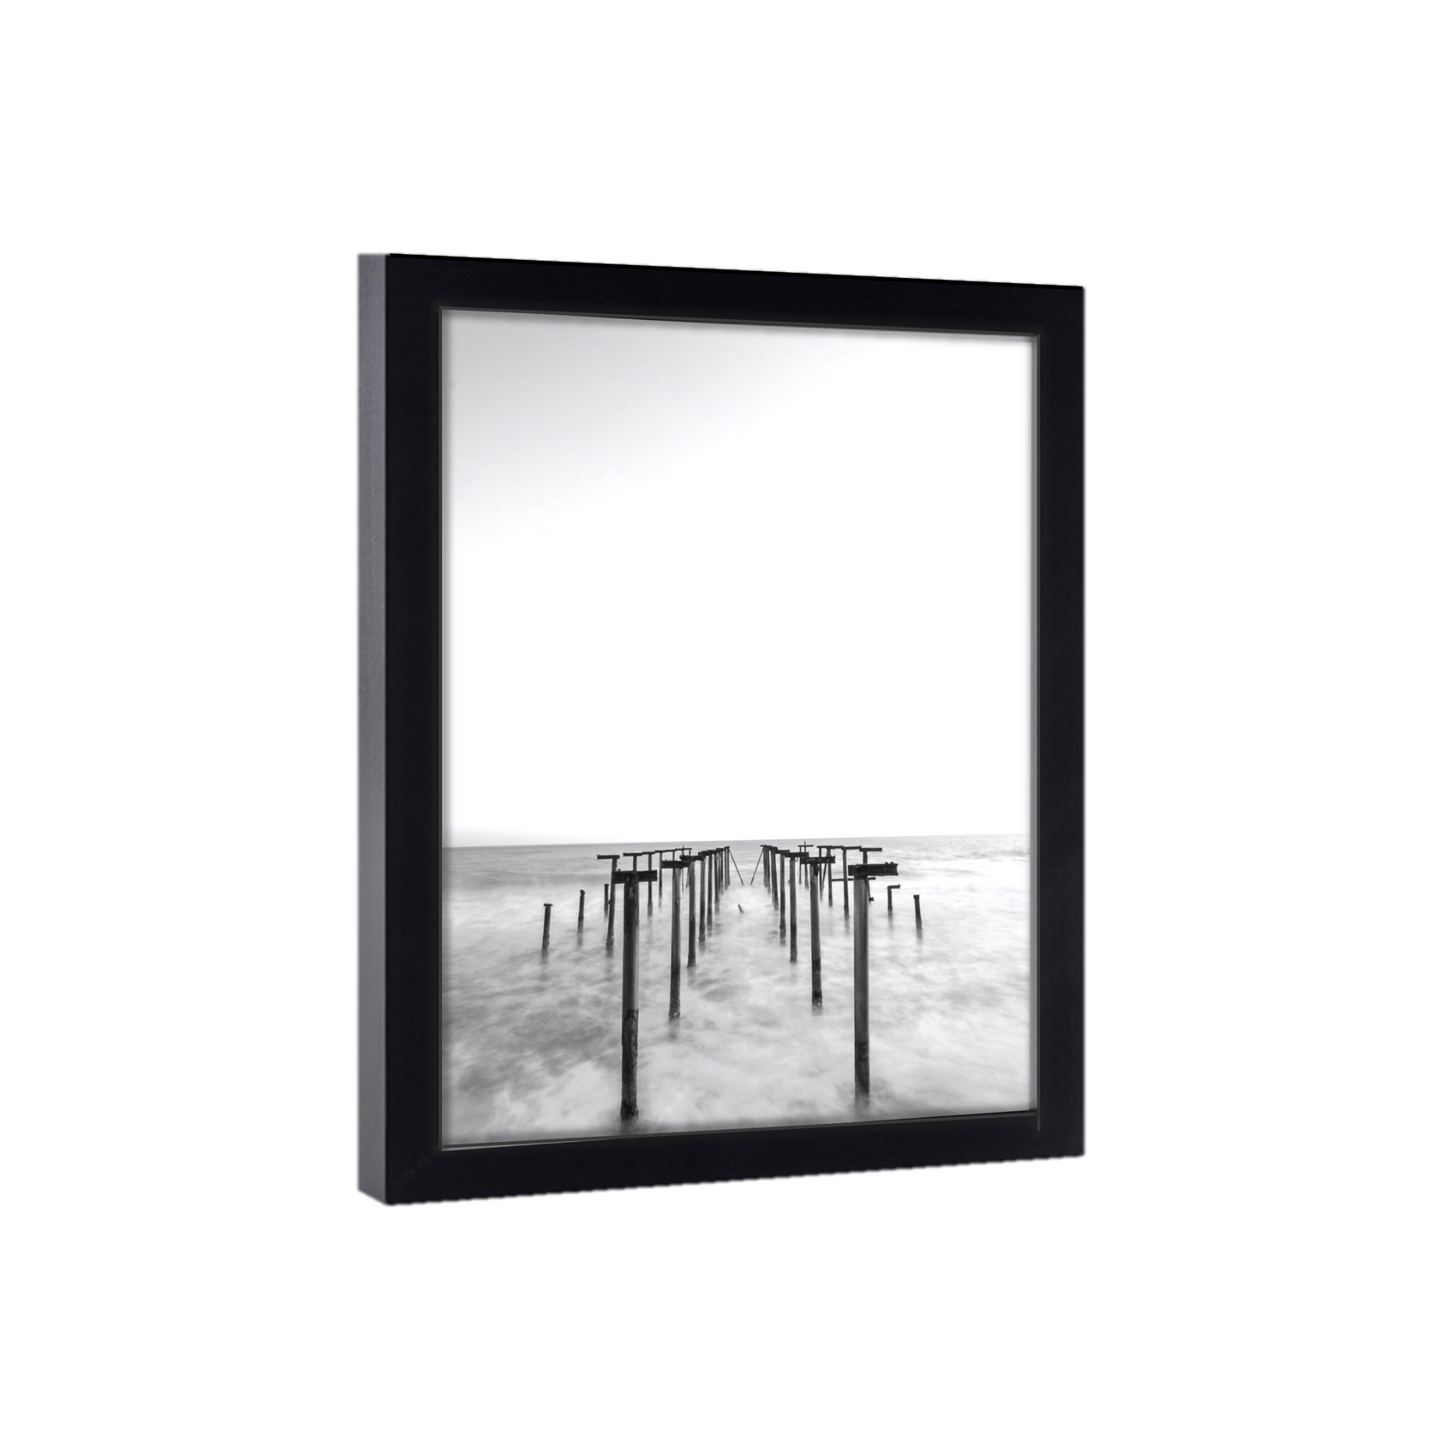 Gallery Wall 14x3 Picture Frame Black Wood 14x3  Poster Size